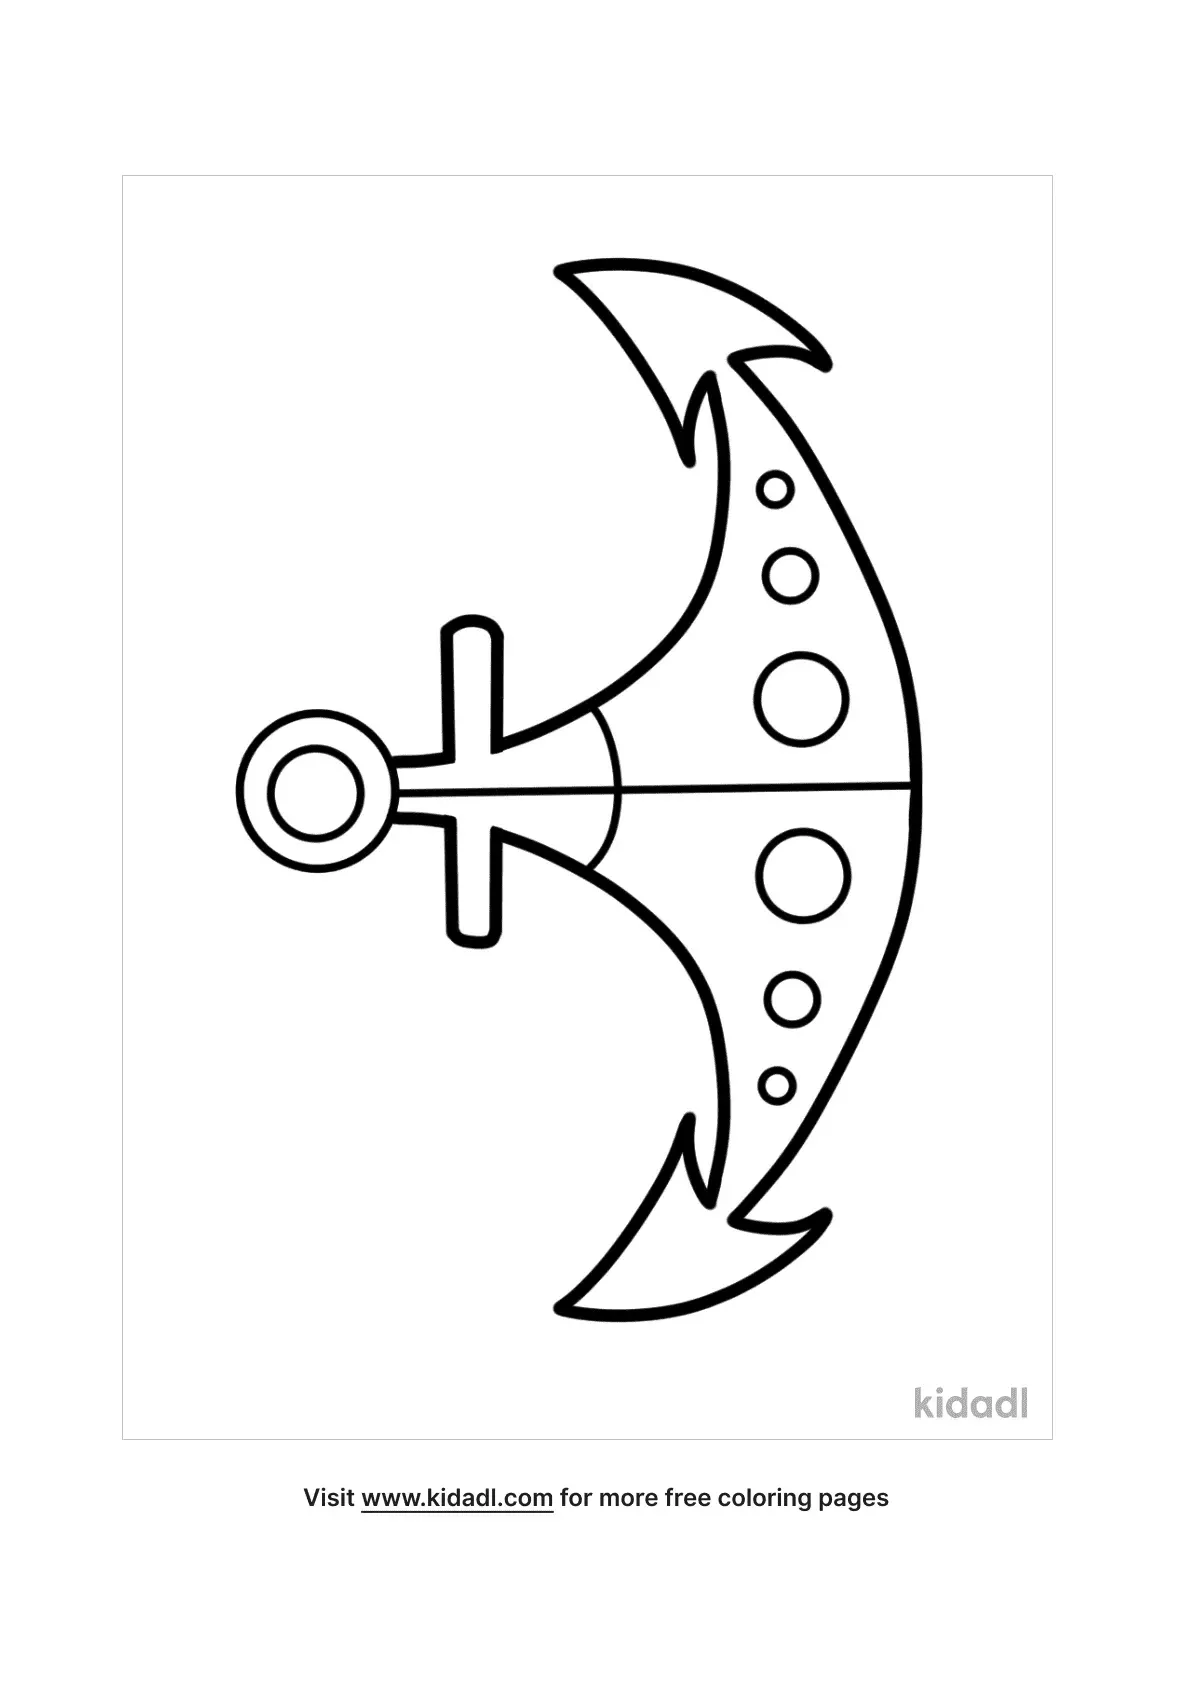 Free Anchor Coloring Page | Coloring Page Printables | Kidadl